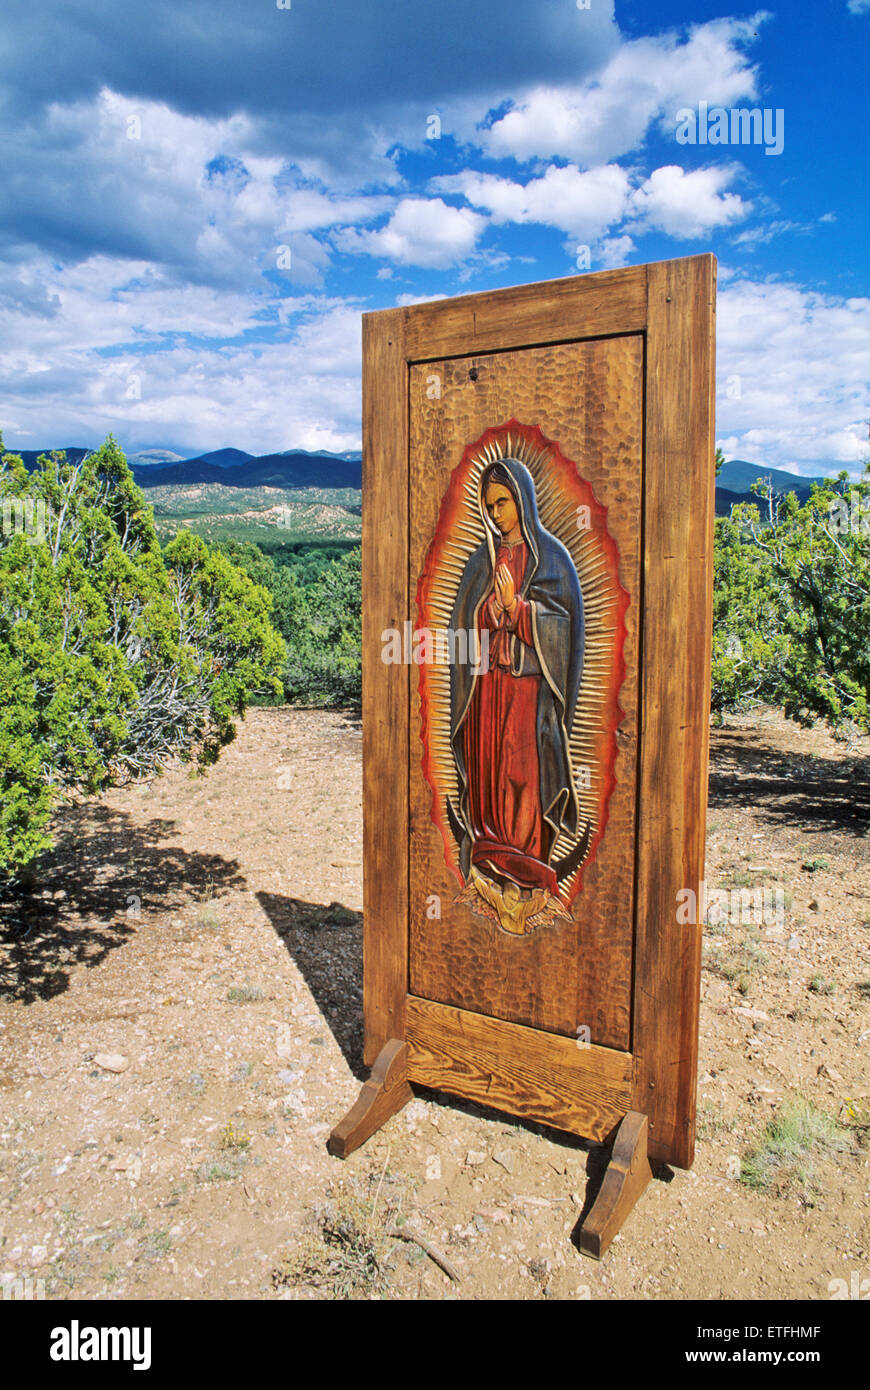 Woodcarver Kirk Kirkpatrick carved and stained a wooden door to produce this image of the Virgin of Guadalupe in Santa Fe. Stock Photo